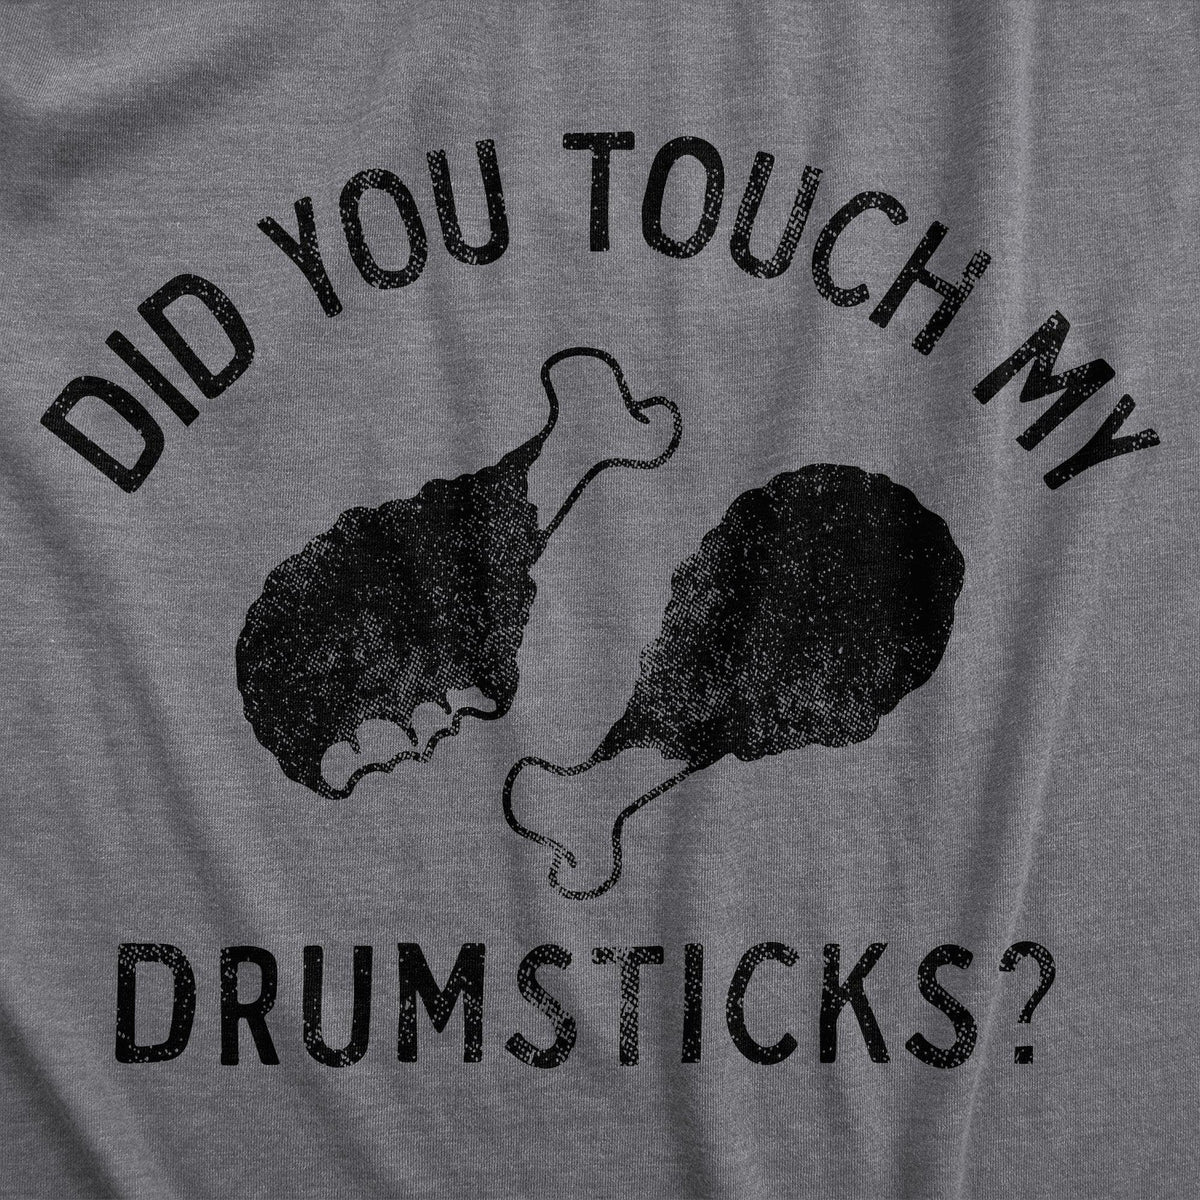 Did You Touch My Drumsticks Women&#39;s Tshirt  -  Crazy Dog T-Shirts